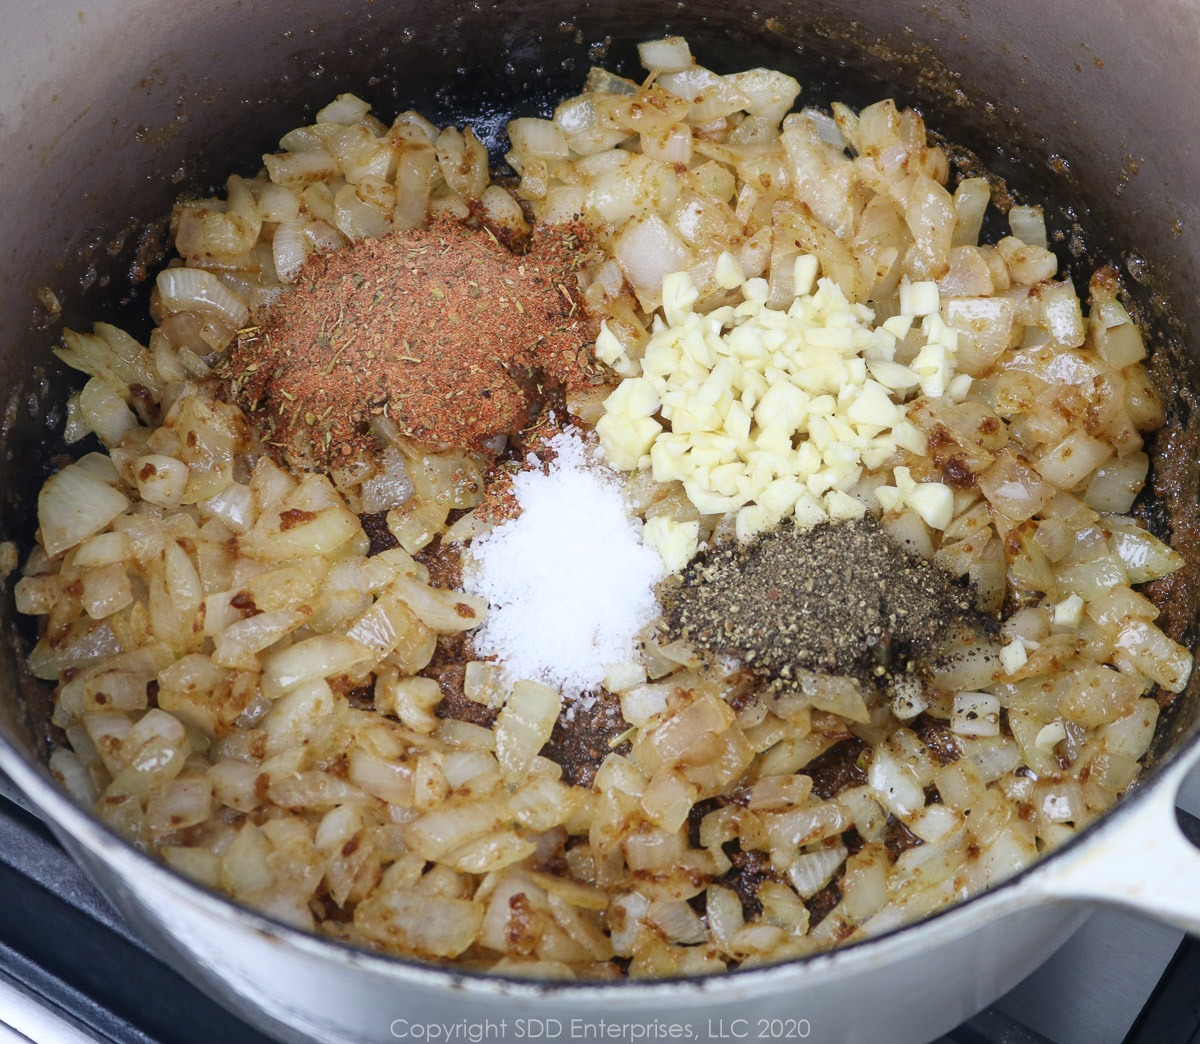 creole seasoning, salt and pepper and chopped garlic added to onions frying in a dutch oven